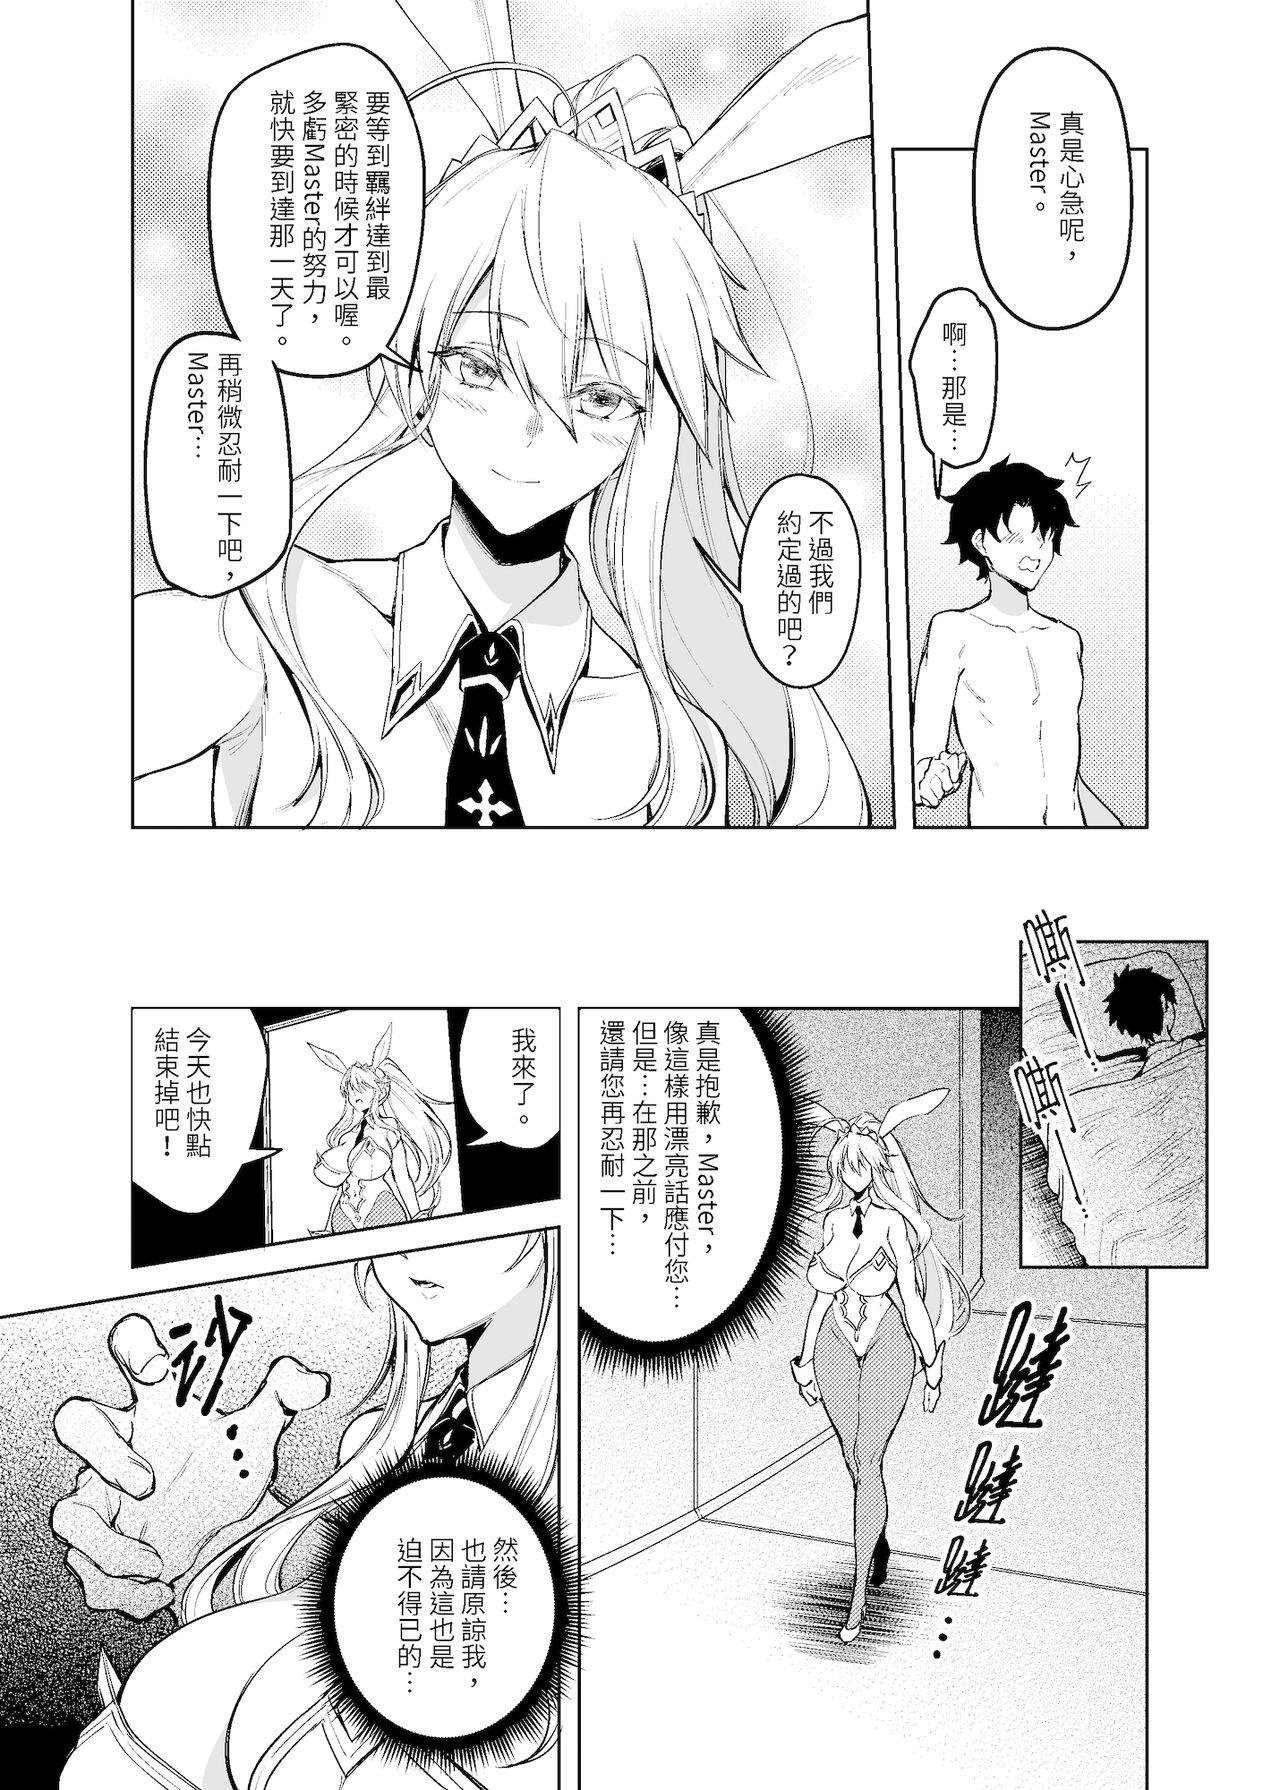 Negao Engraving of lust with King Bunny, Part 1 - Fate grand order Teen Sex - Page 4